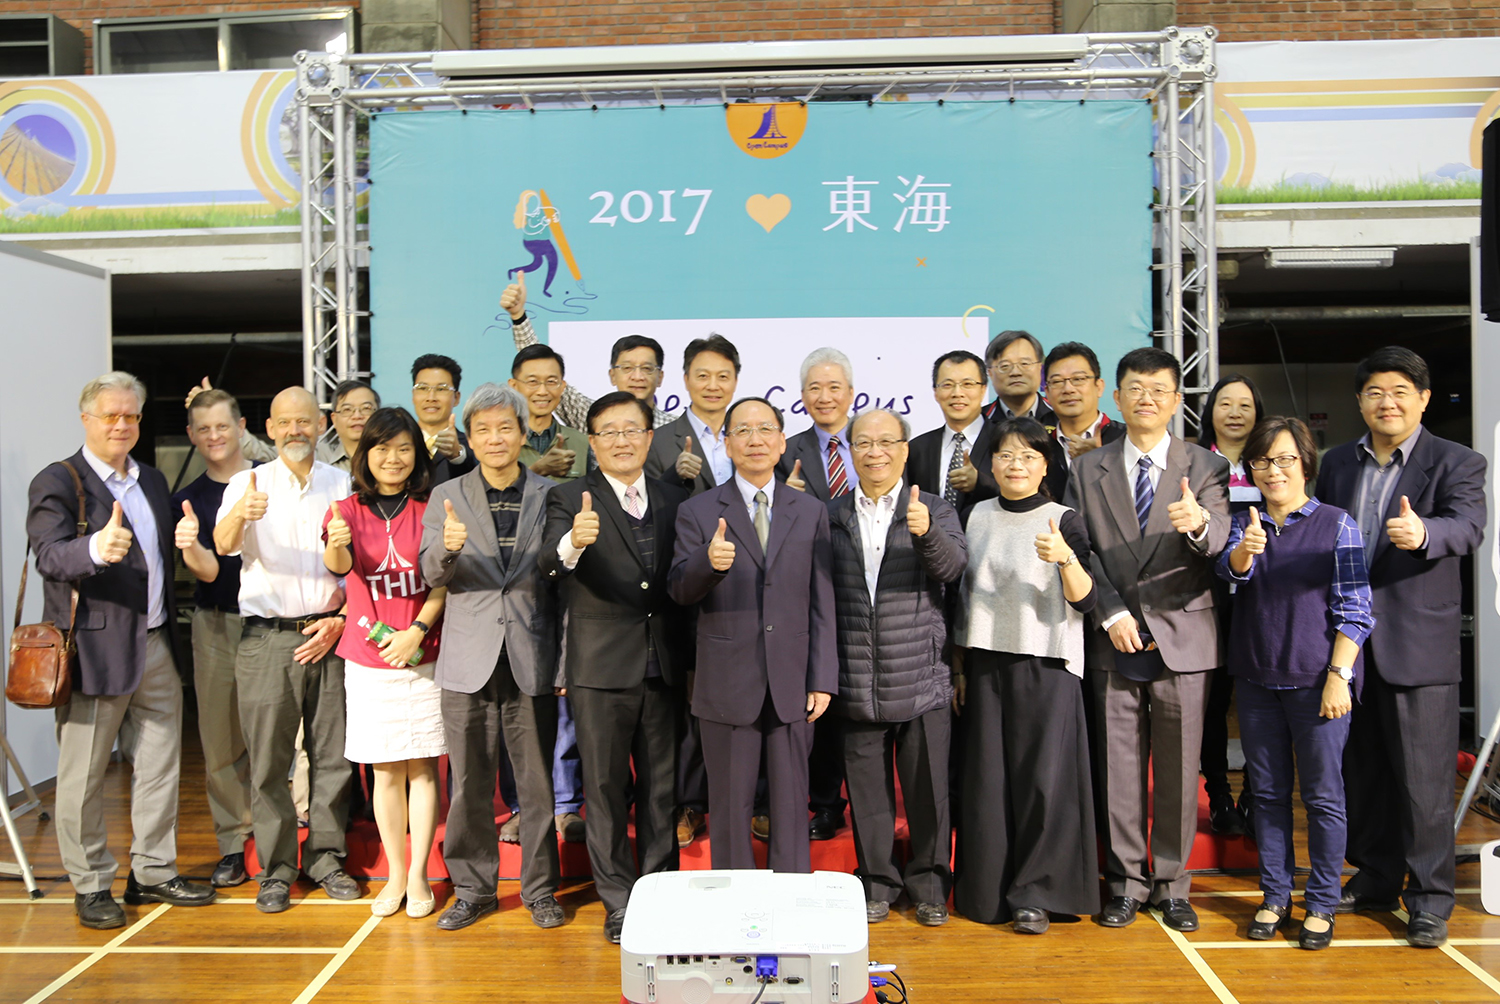 Honorable guests of Tunghai Open Campus expo